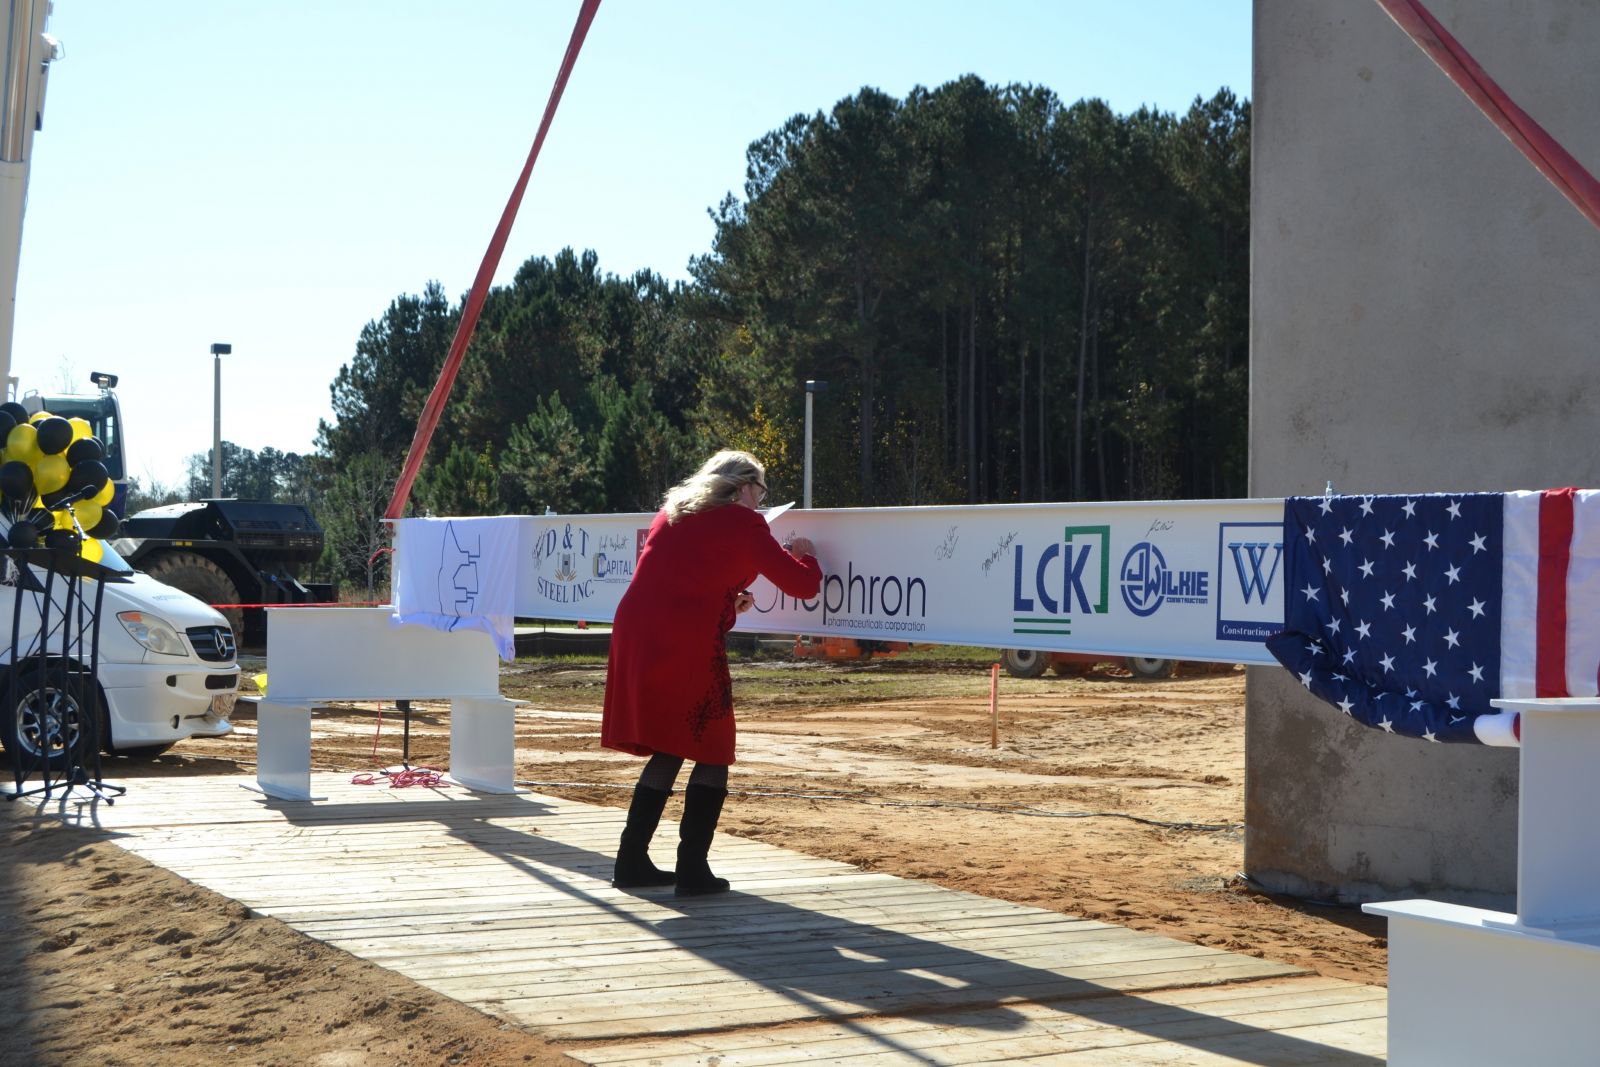 Nephron's $215.8 million expansion is part of $4 billion in capital investment recruited to South Carolina in 2020, according to the S.C. Commerce Department. Nephron CEO Lou Kennedy signs a beam during a milestone construction ceremony last November. (Photo/Melinda Waldrop)